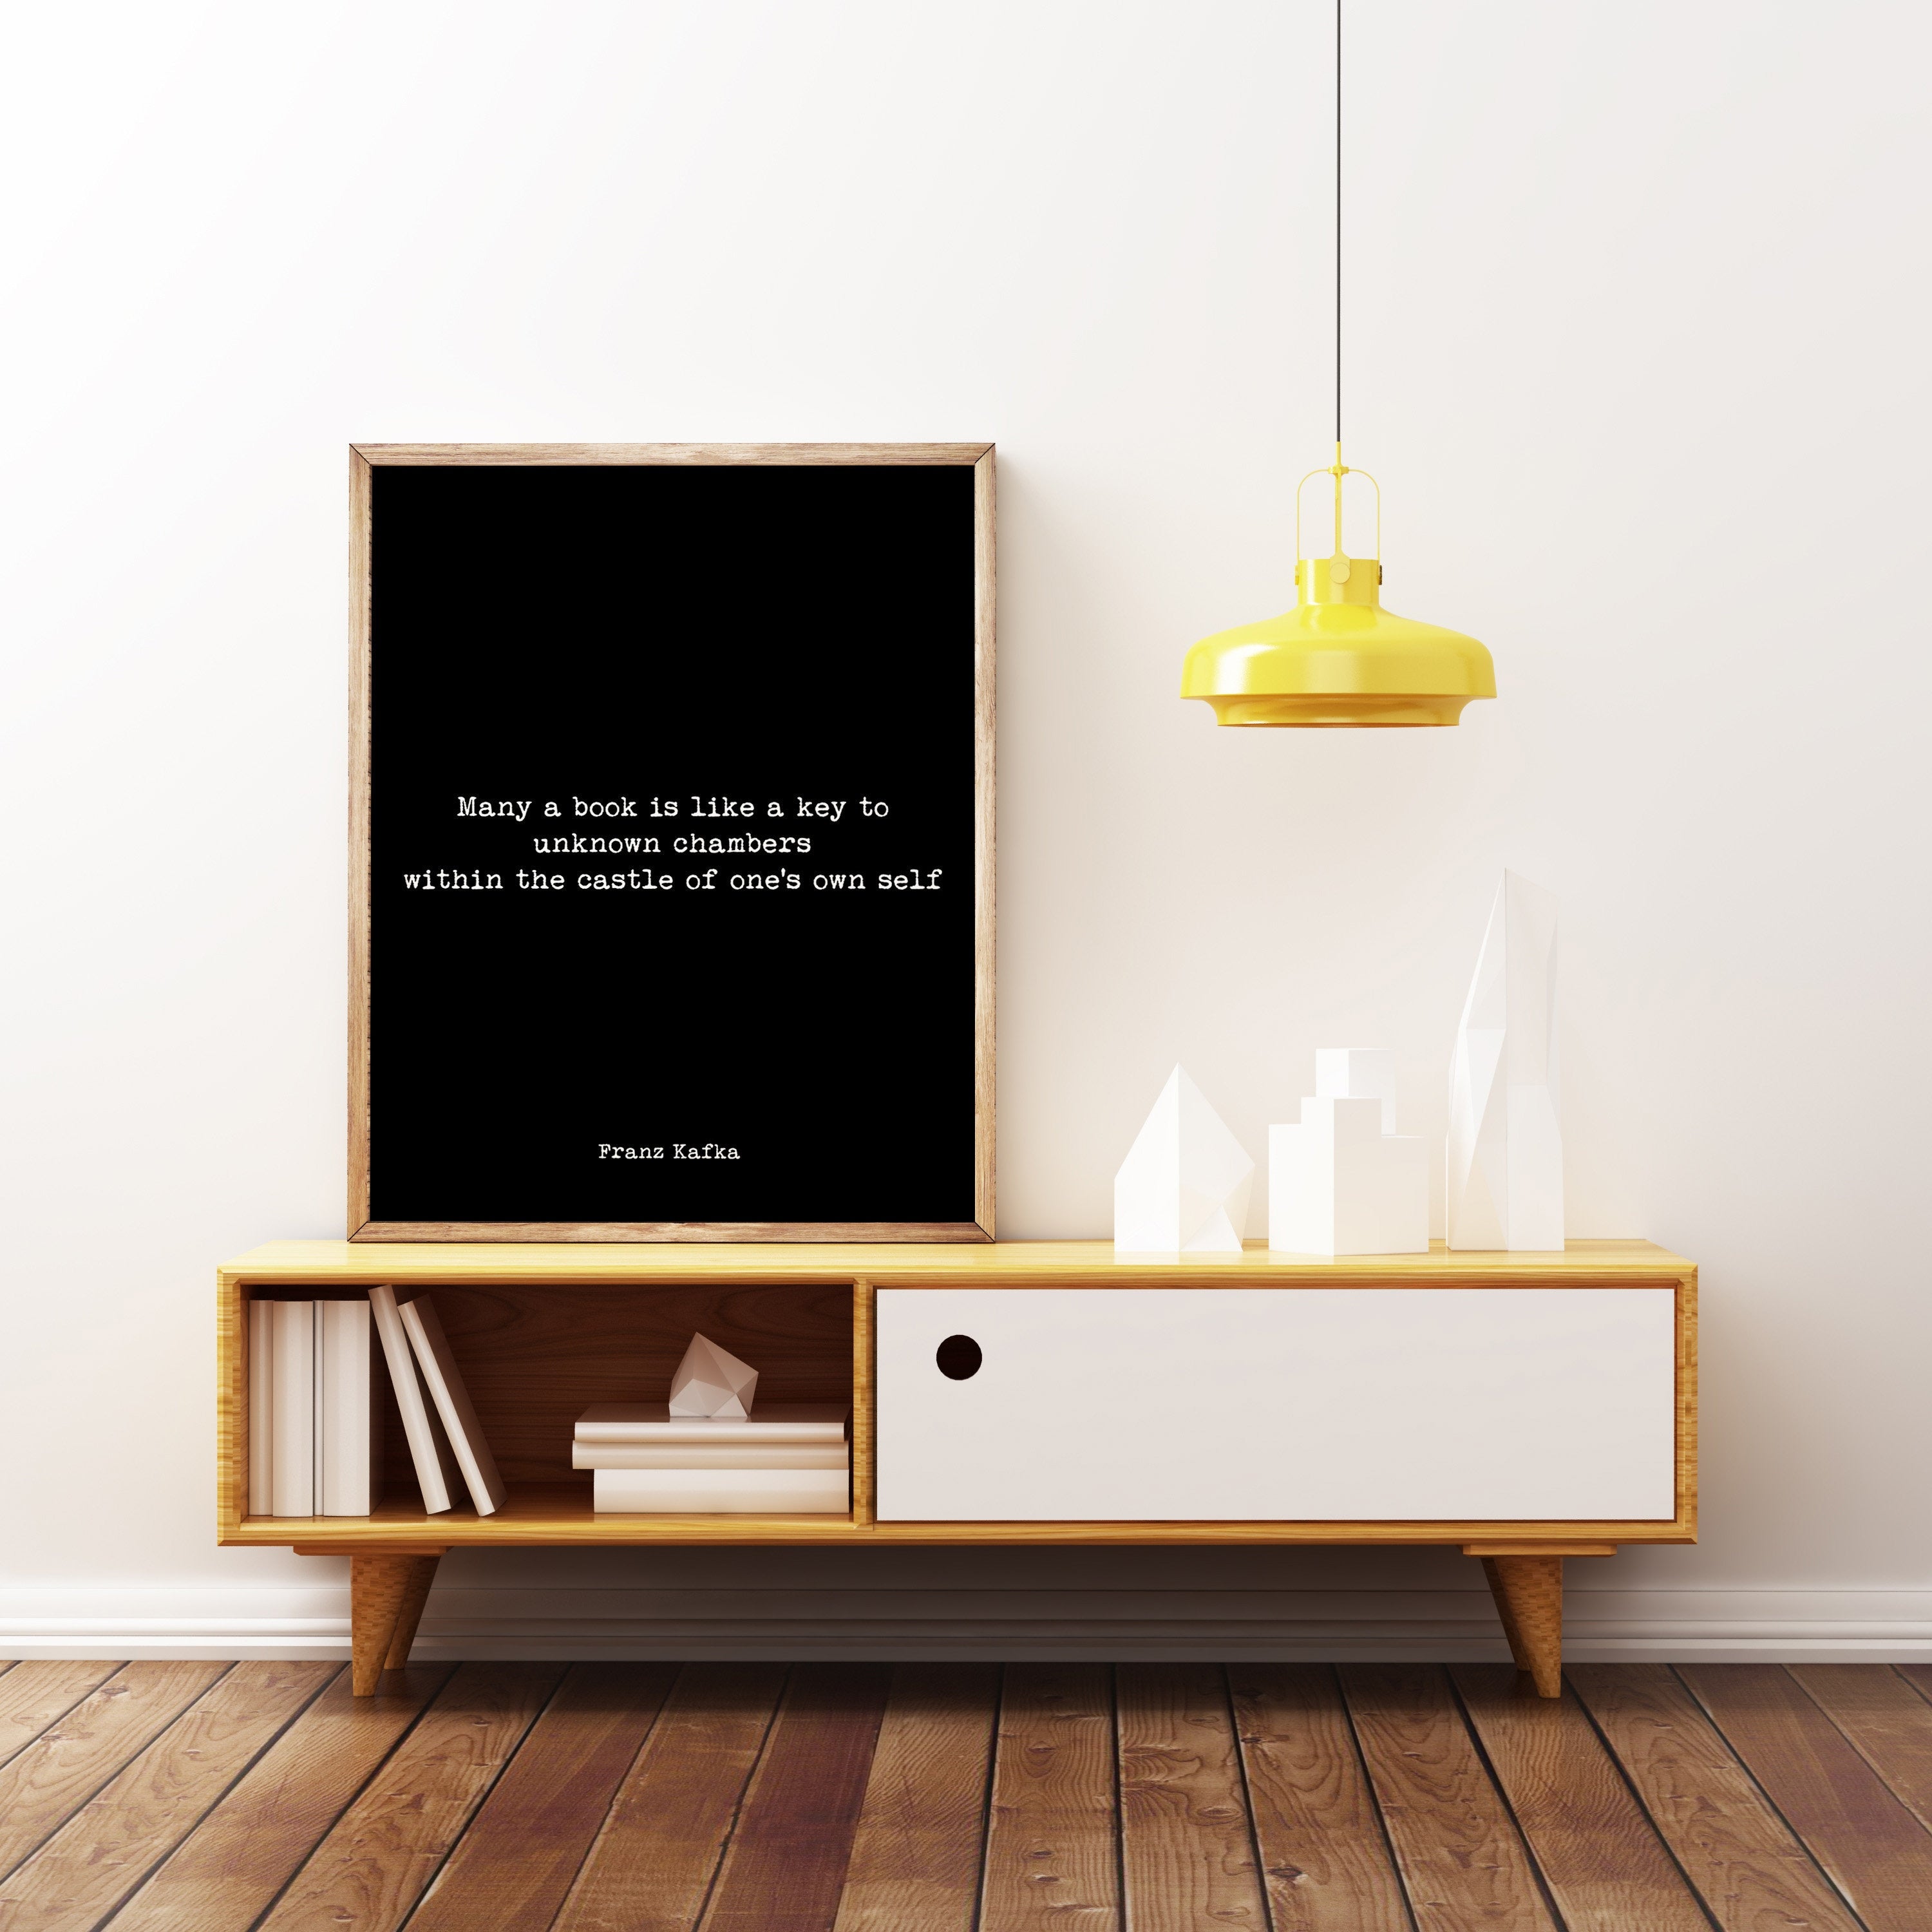 Franz Kafka Literary Quote Print, Many a book is like a key to unknown chambers